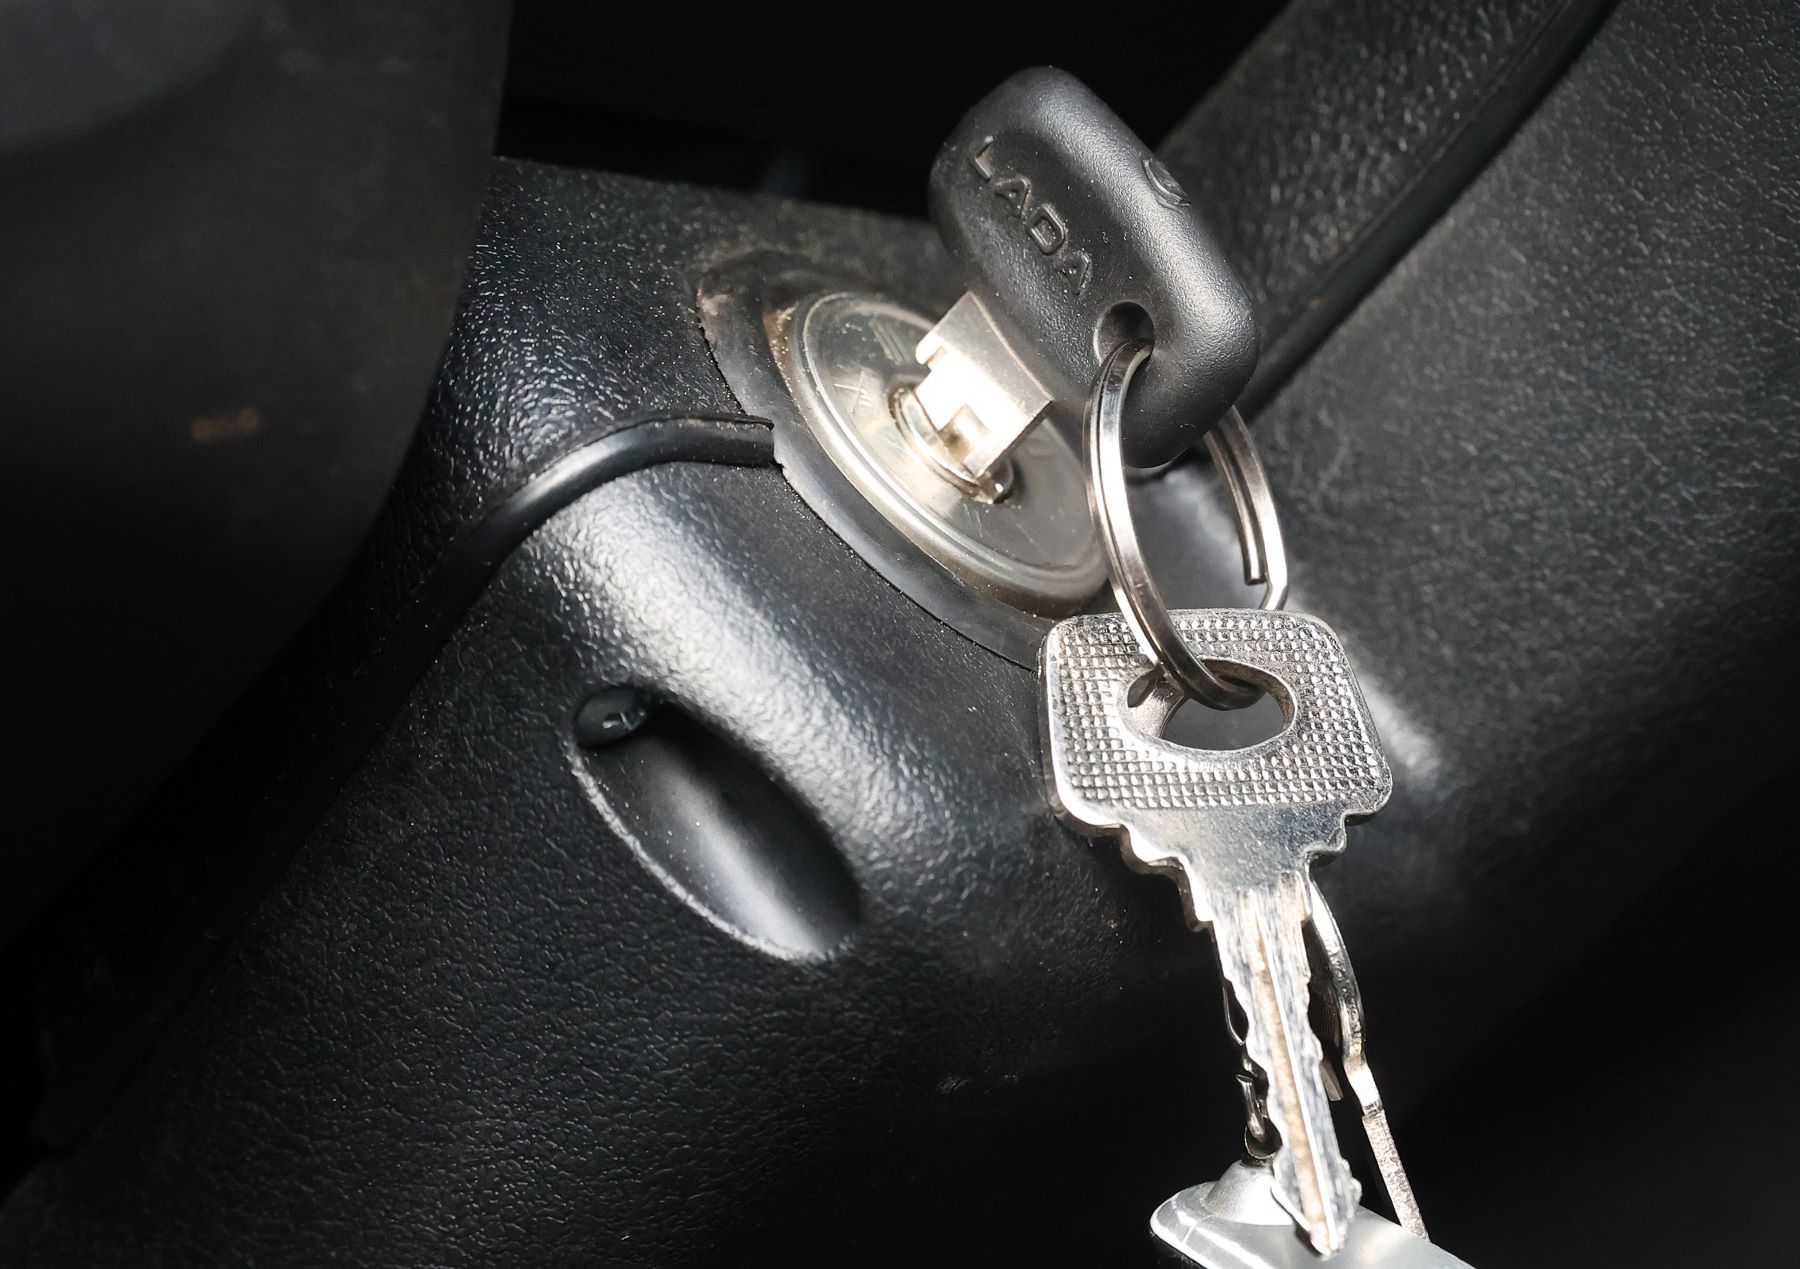 A car key placed in a vehicle's ignition